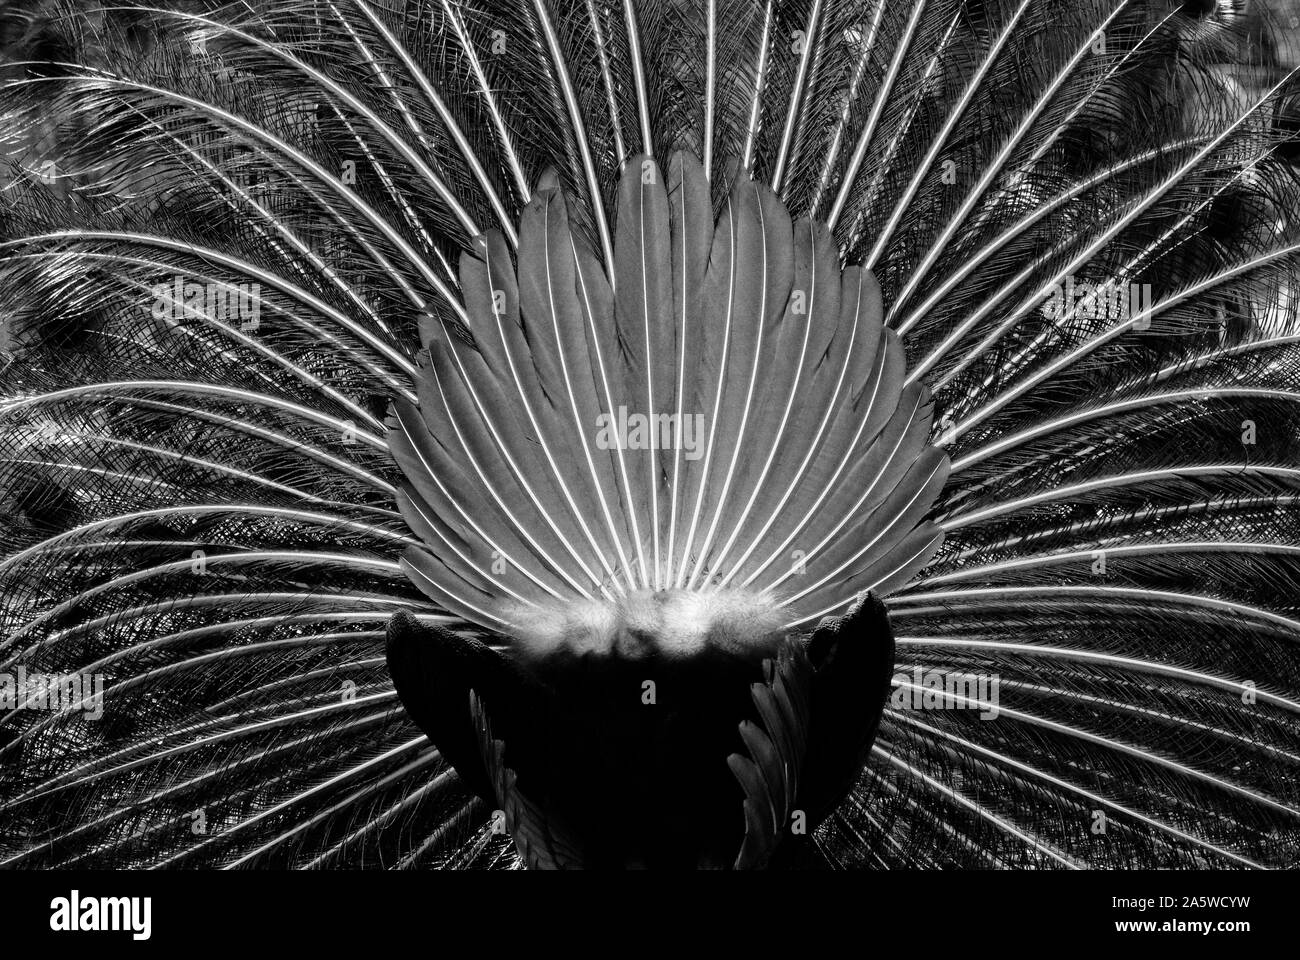 Merida, Yucatan, Mexico - February 11, 2012: Rear view of indian peafowl feathers fan. Black and white. Stock Photo